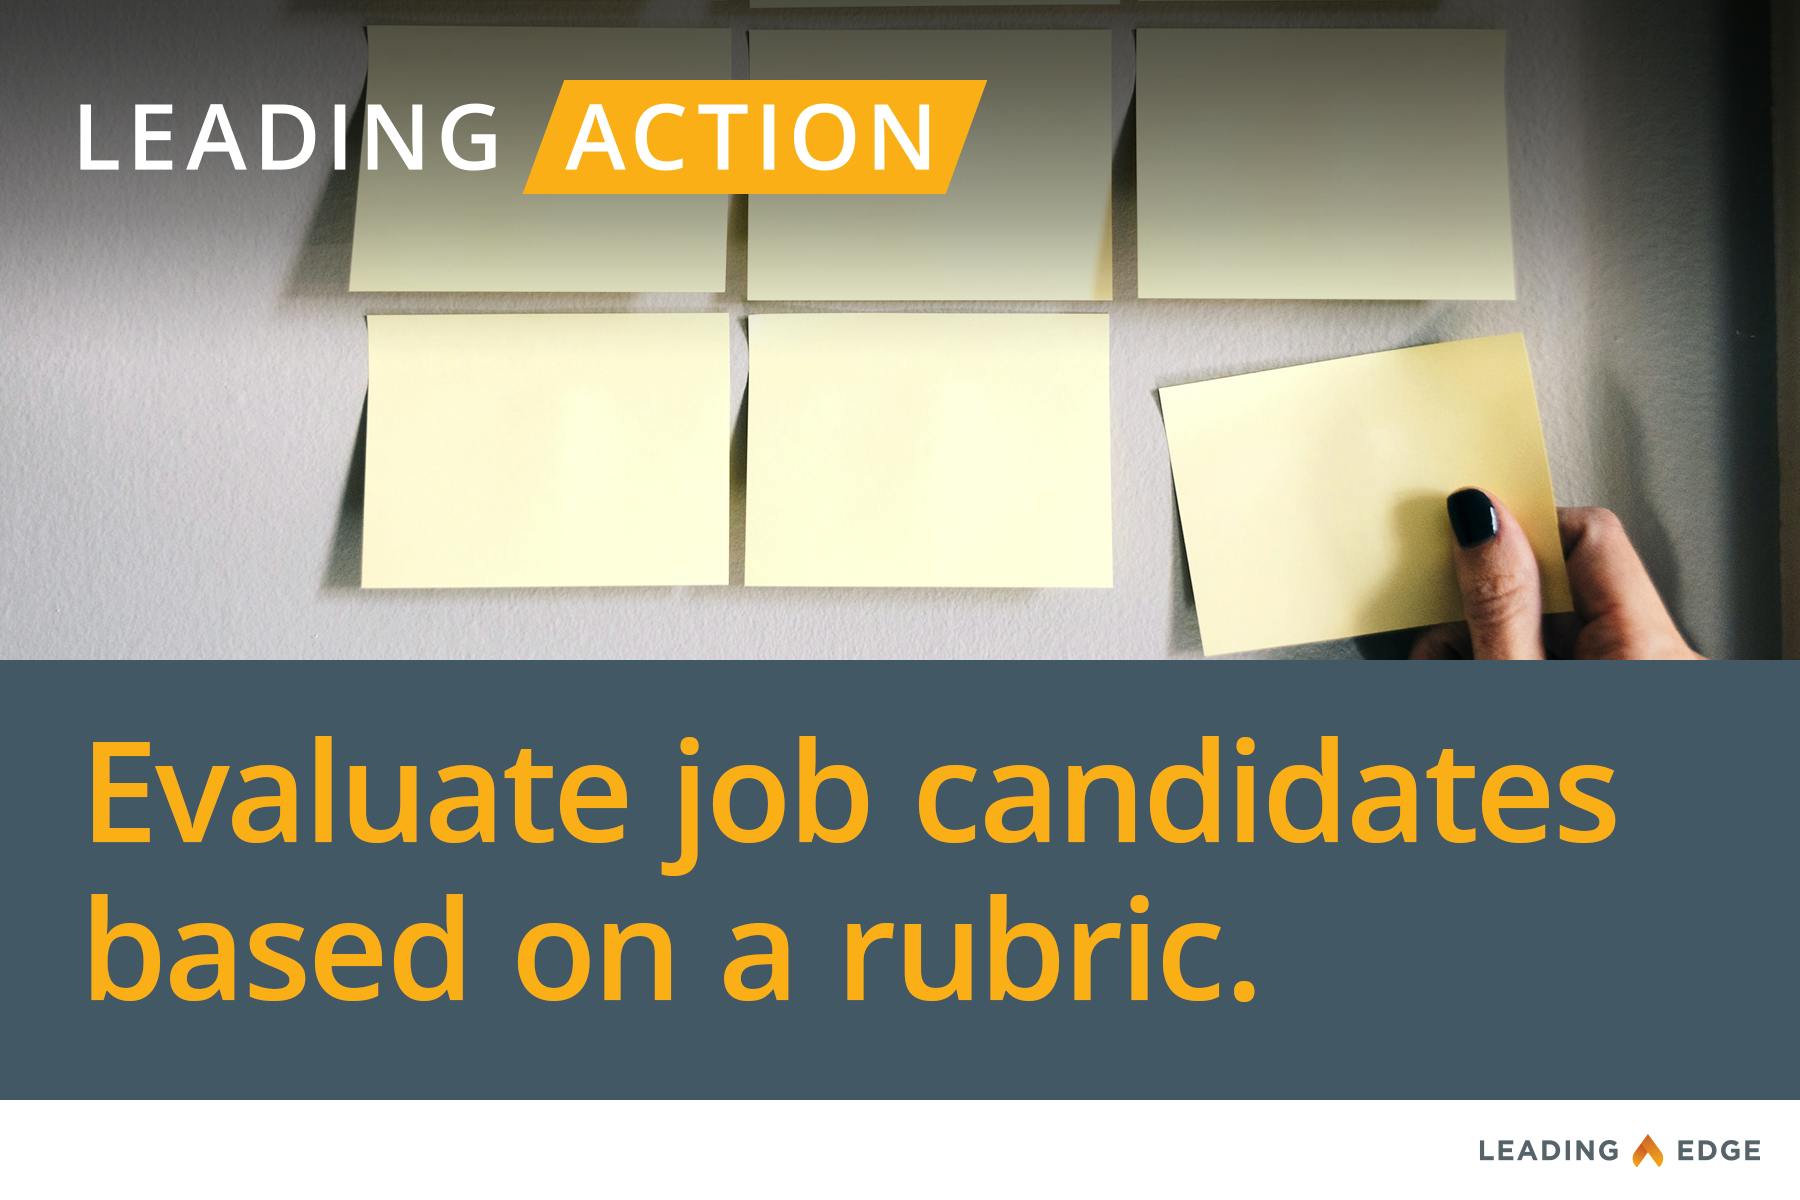 Leading Action: Evaluate job candidates based on a rubric.